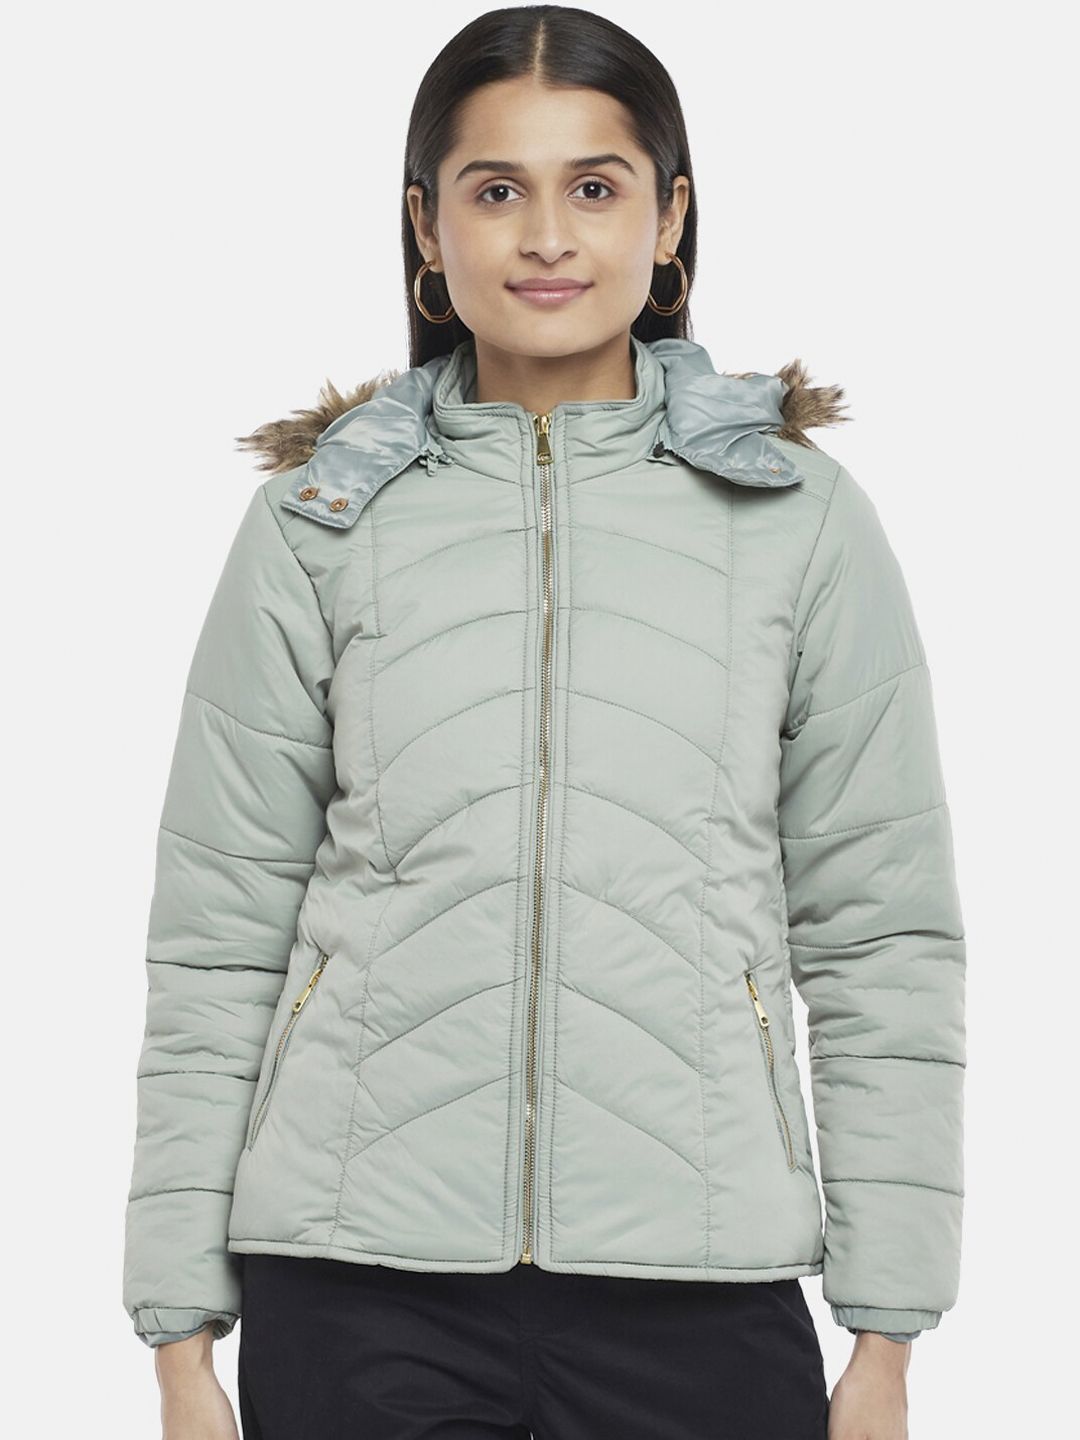 Honey by Pantaloons Women Green Quilted Jacket Price in India